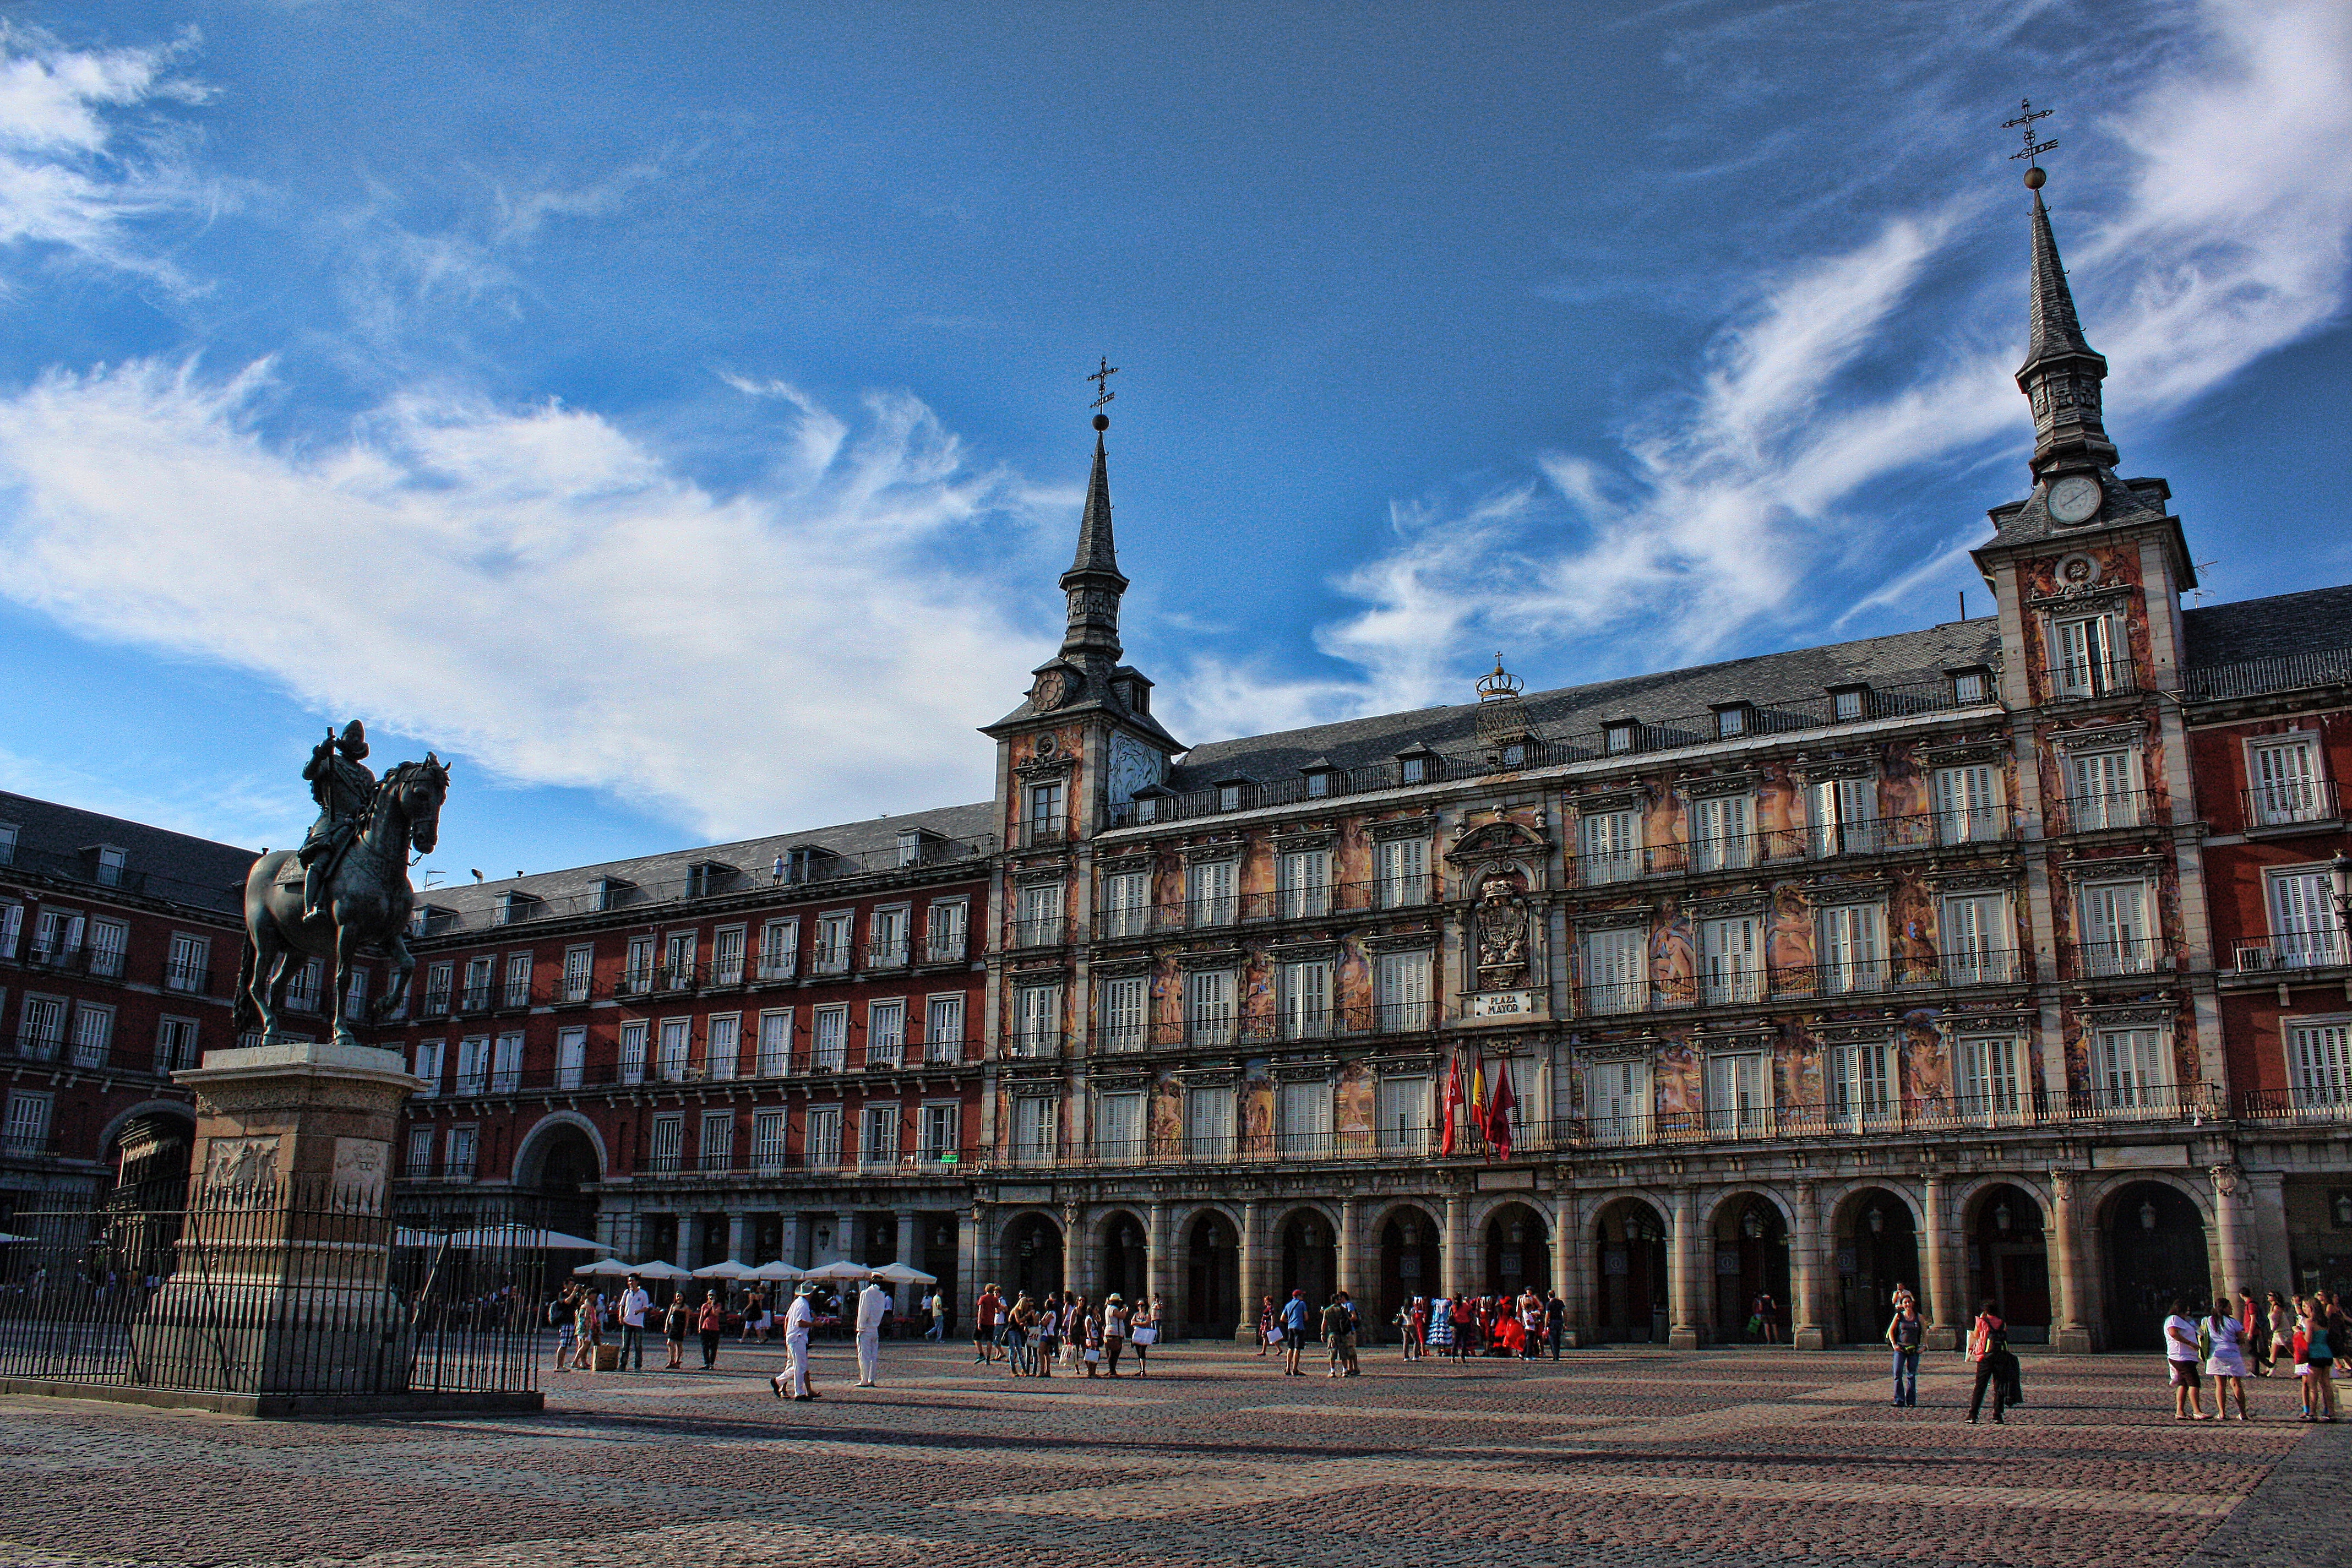 spain, man made, building, madrid, square, statue